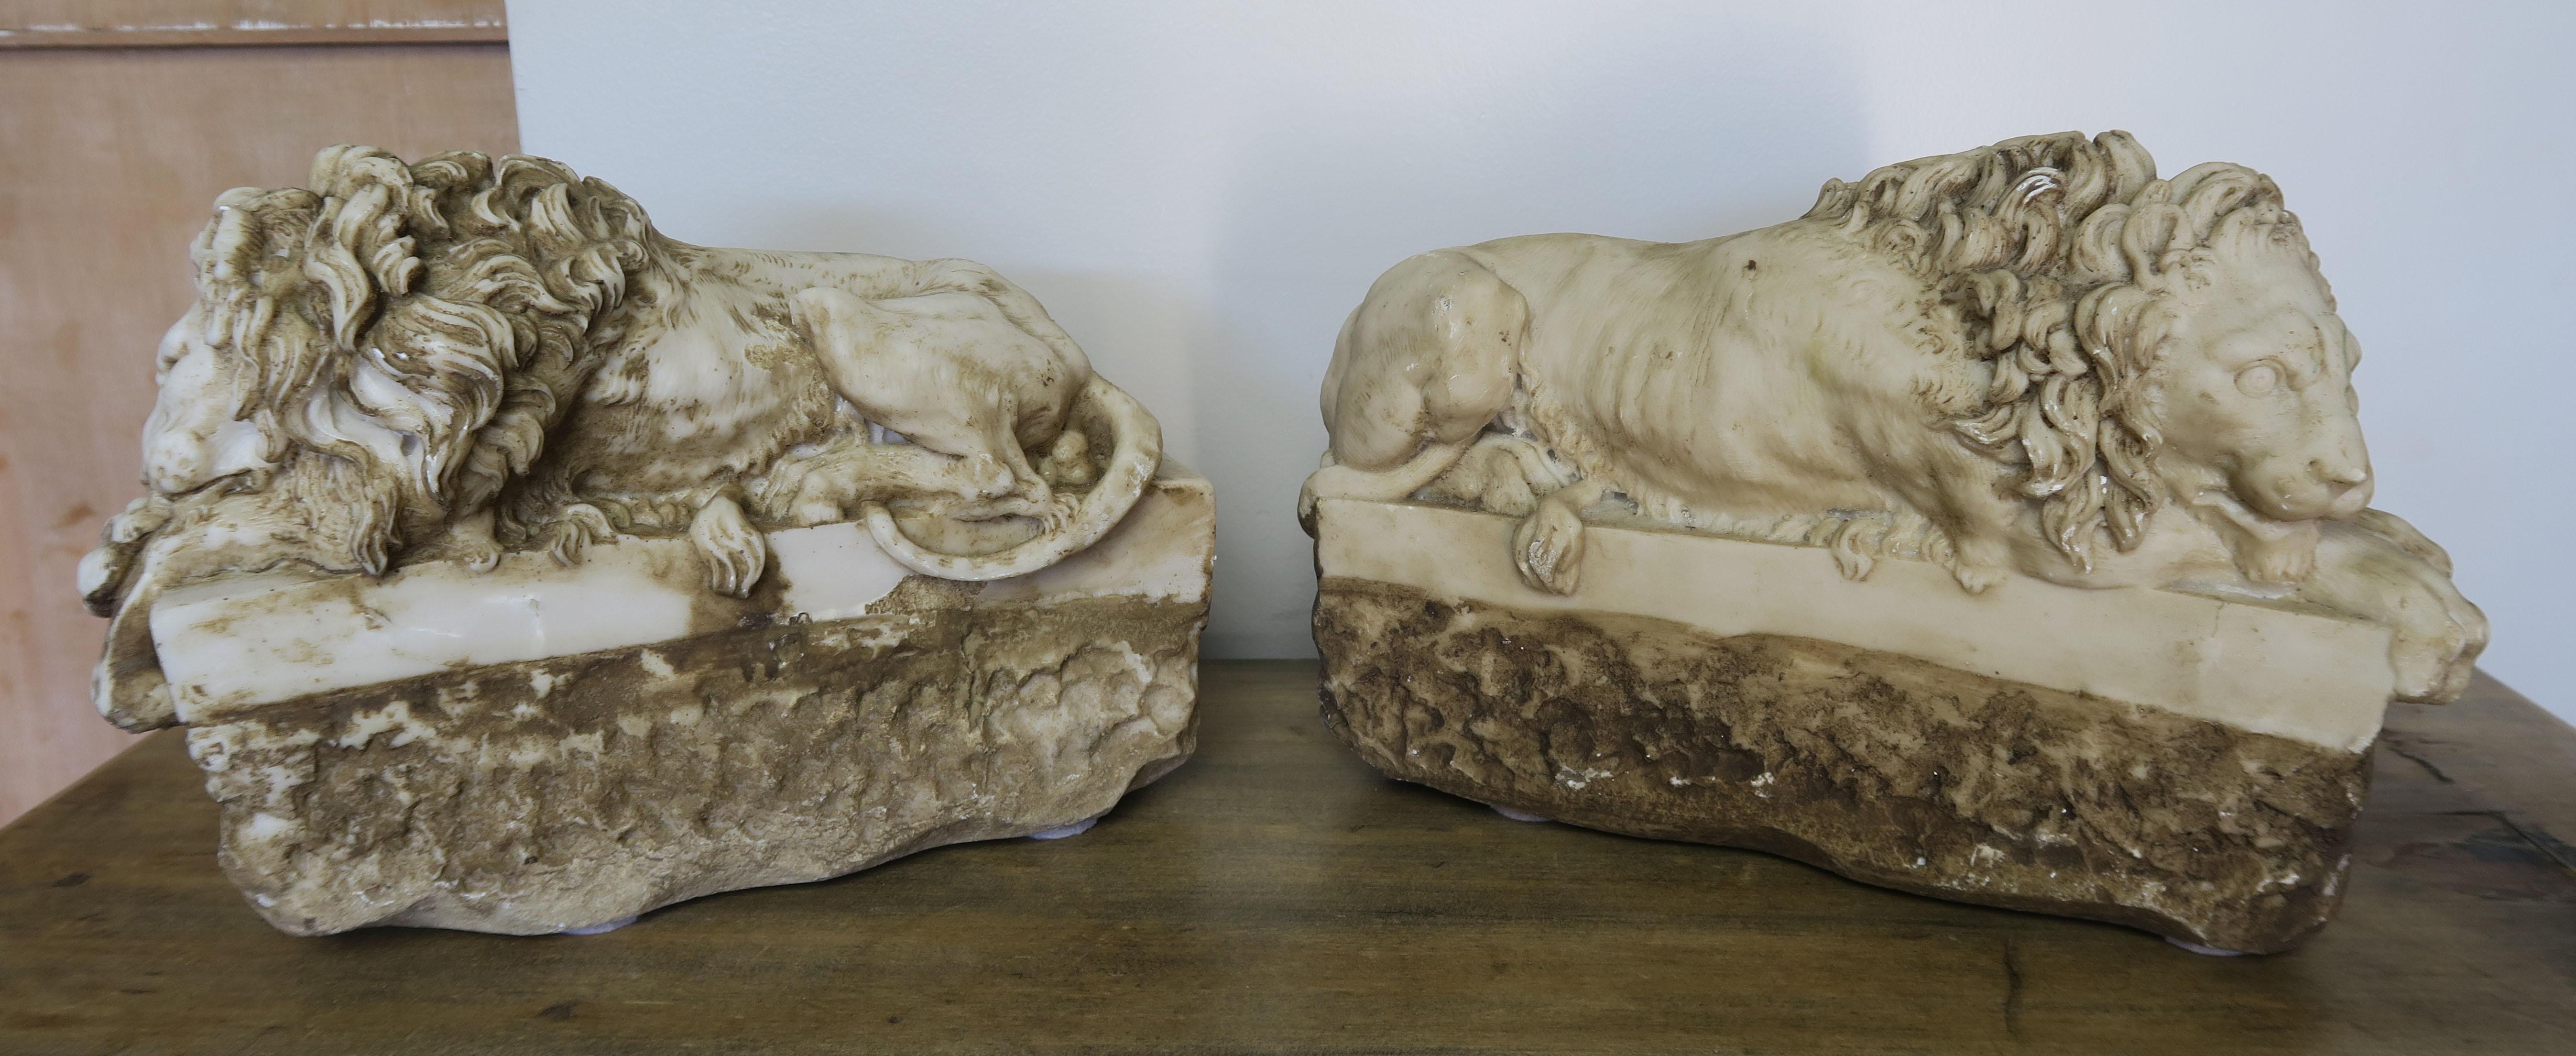 Pair of French cast stone lions. The intricate details can be seen throughout. They would be great mounted into custom lamps or to use as decor on a table or bookshelf.